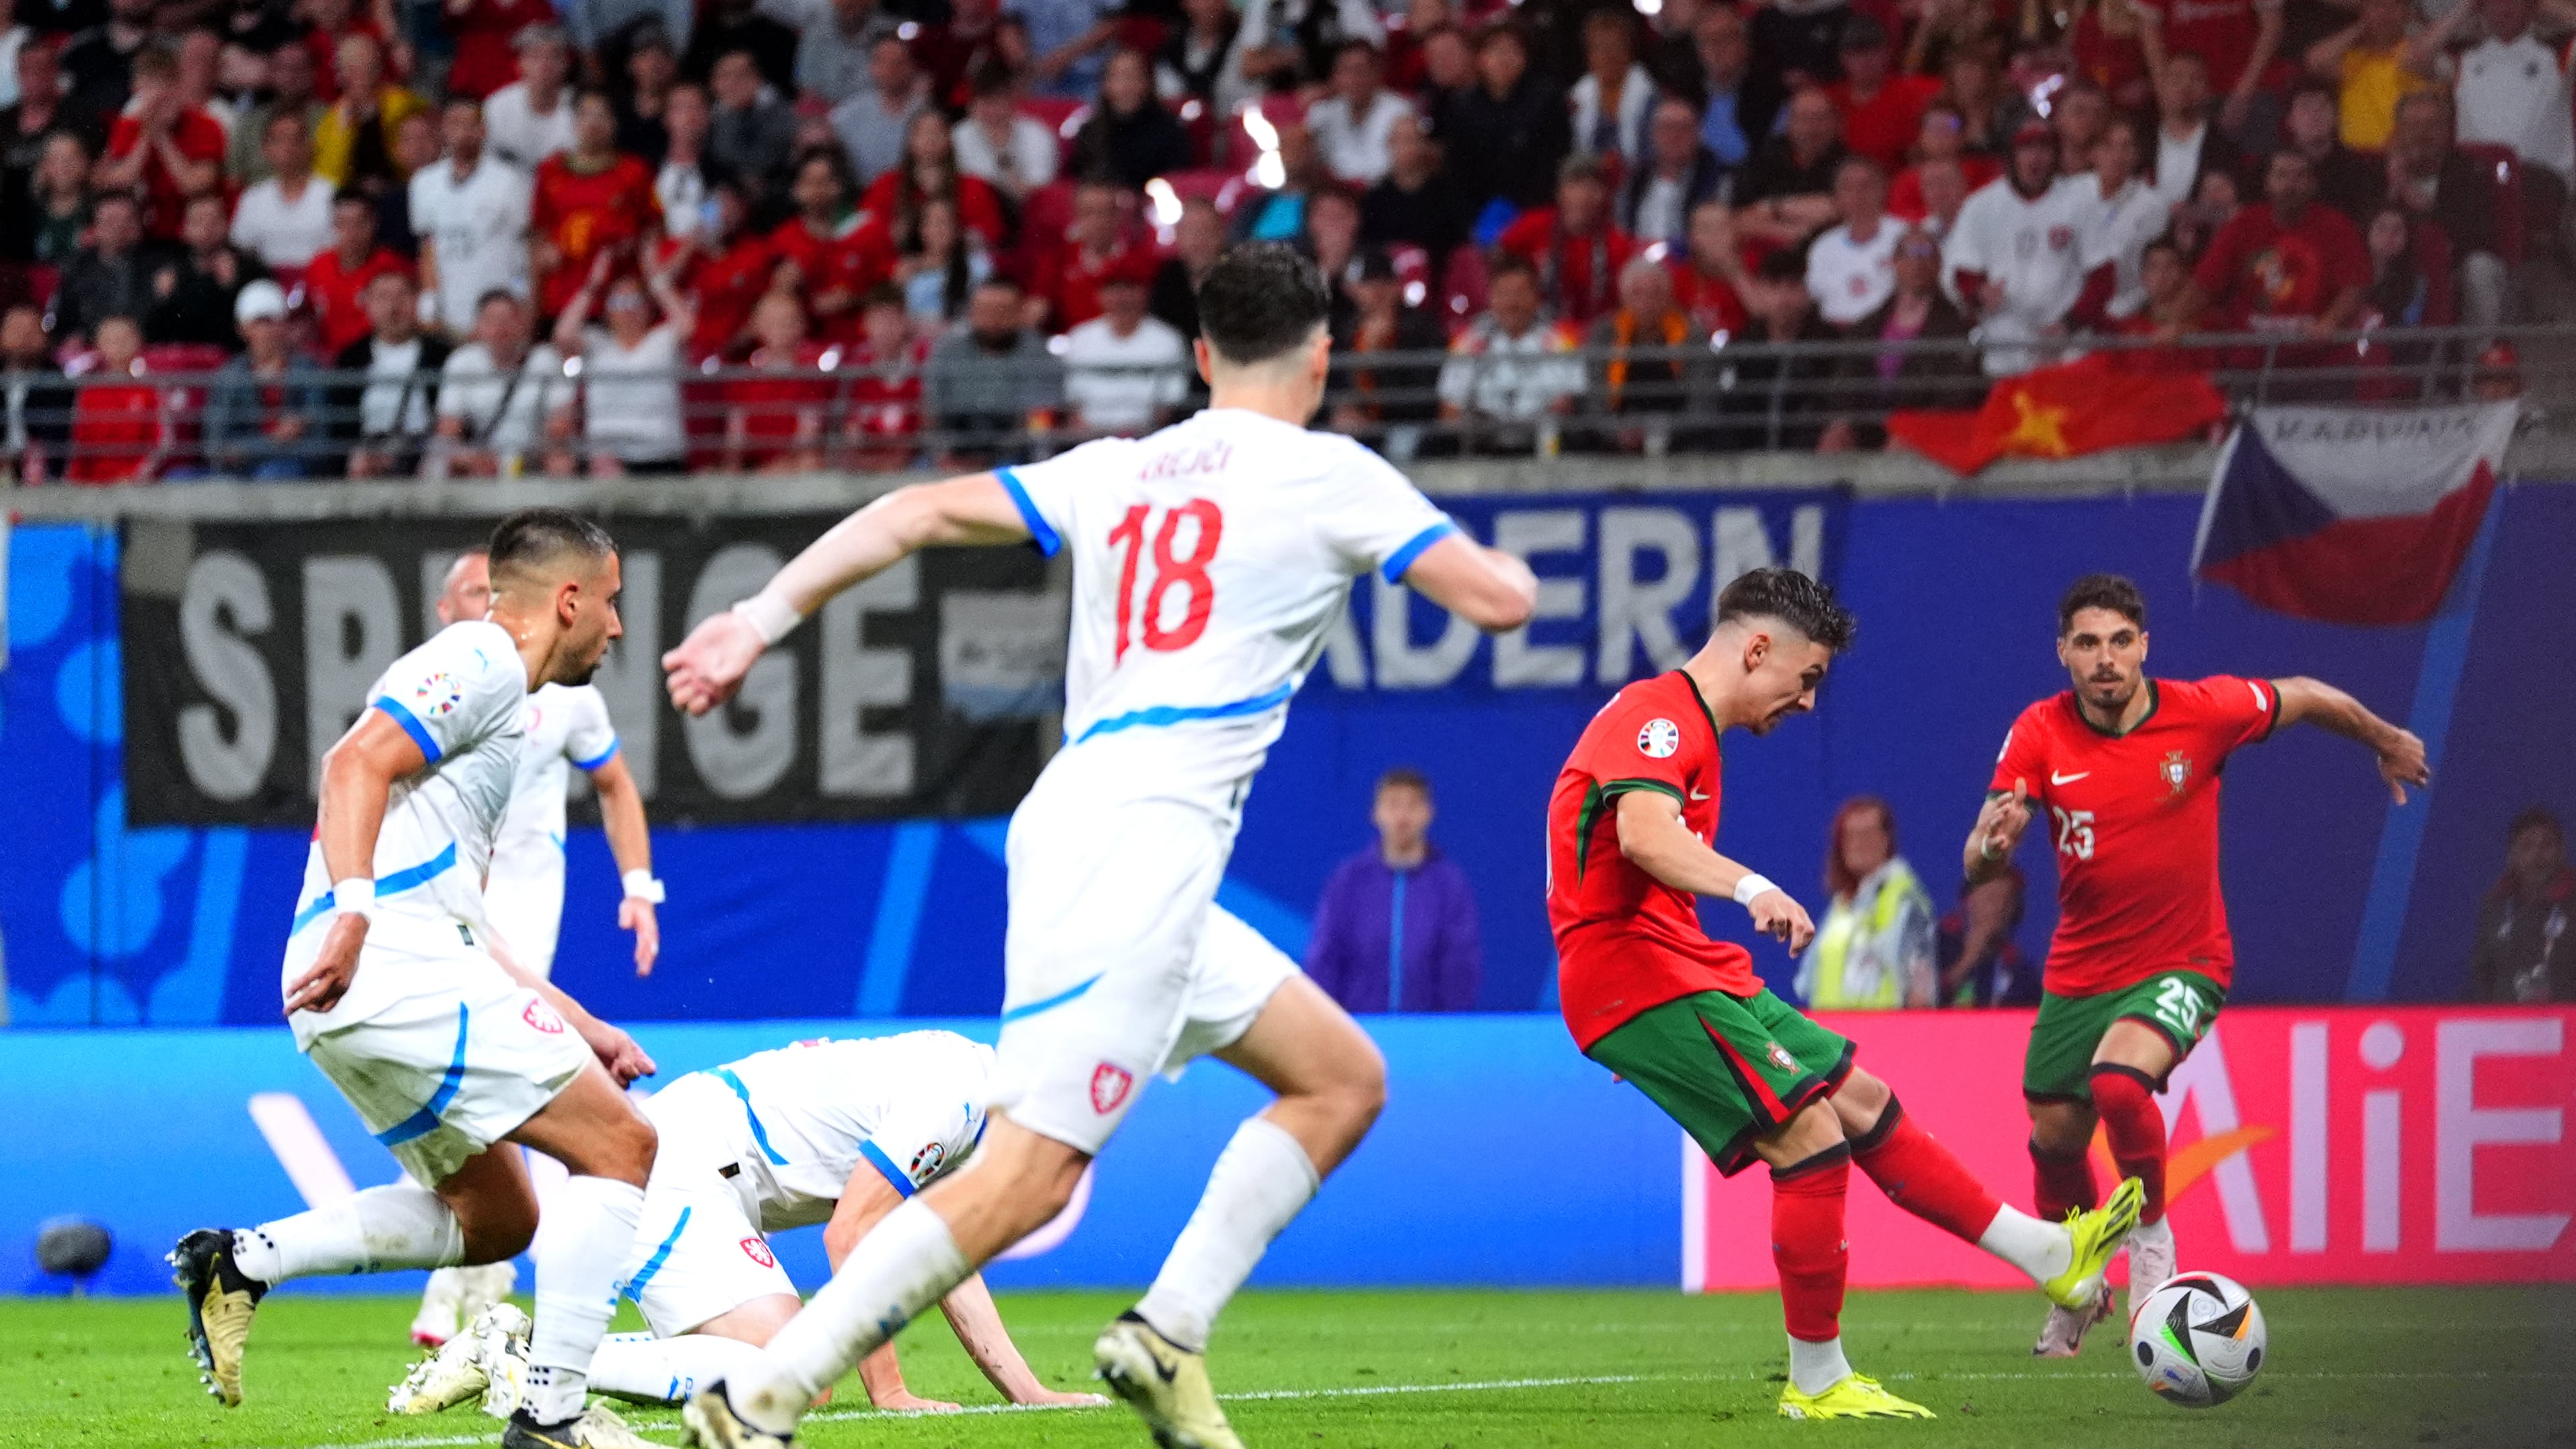 Francisco Conceicao hit the winner on his competitive debut for Portugal